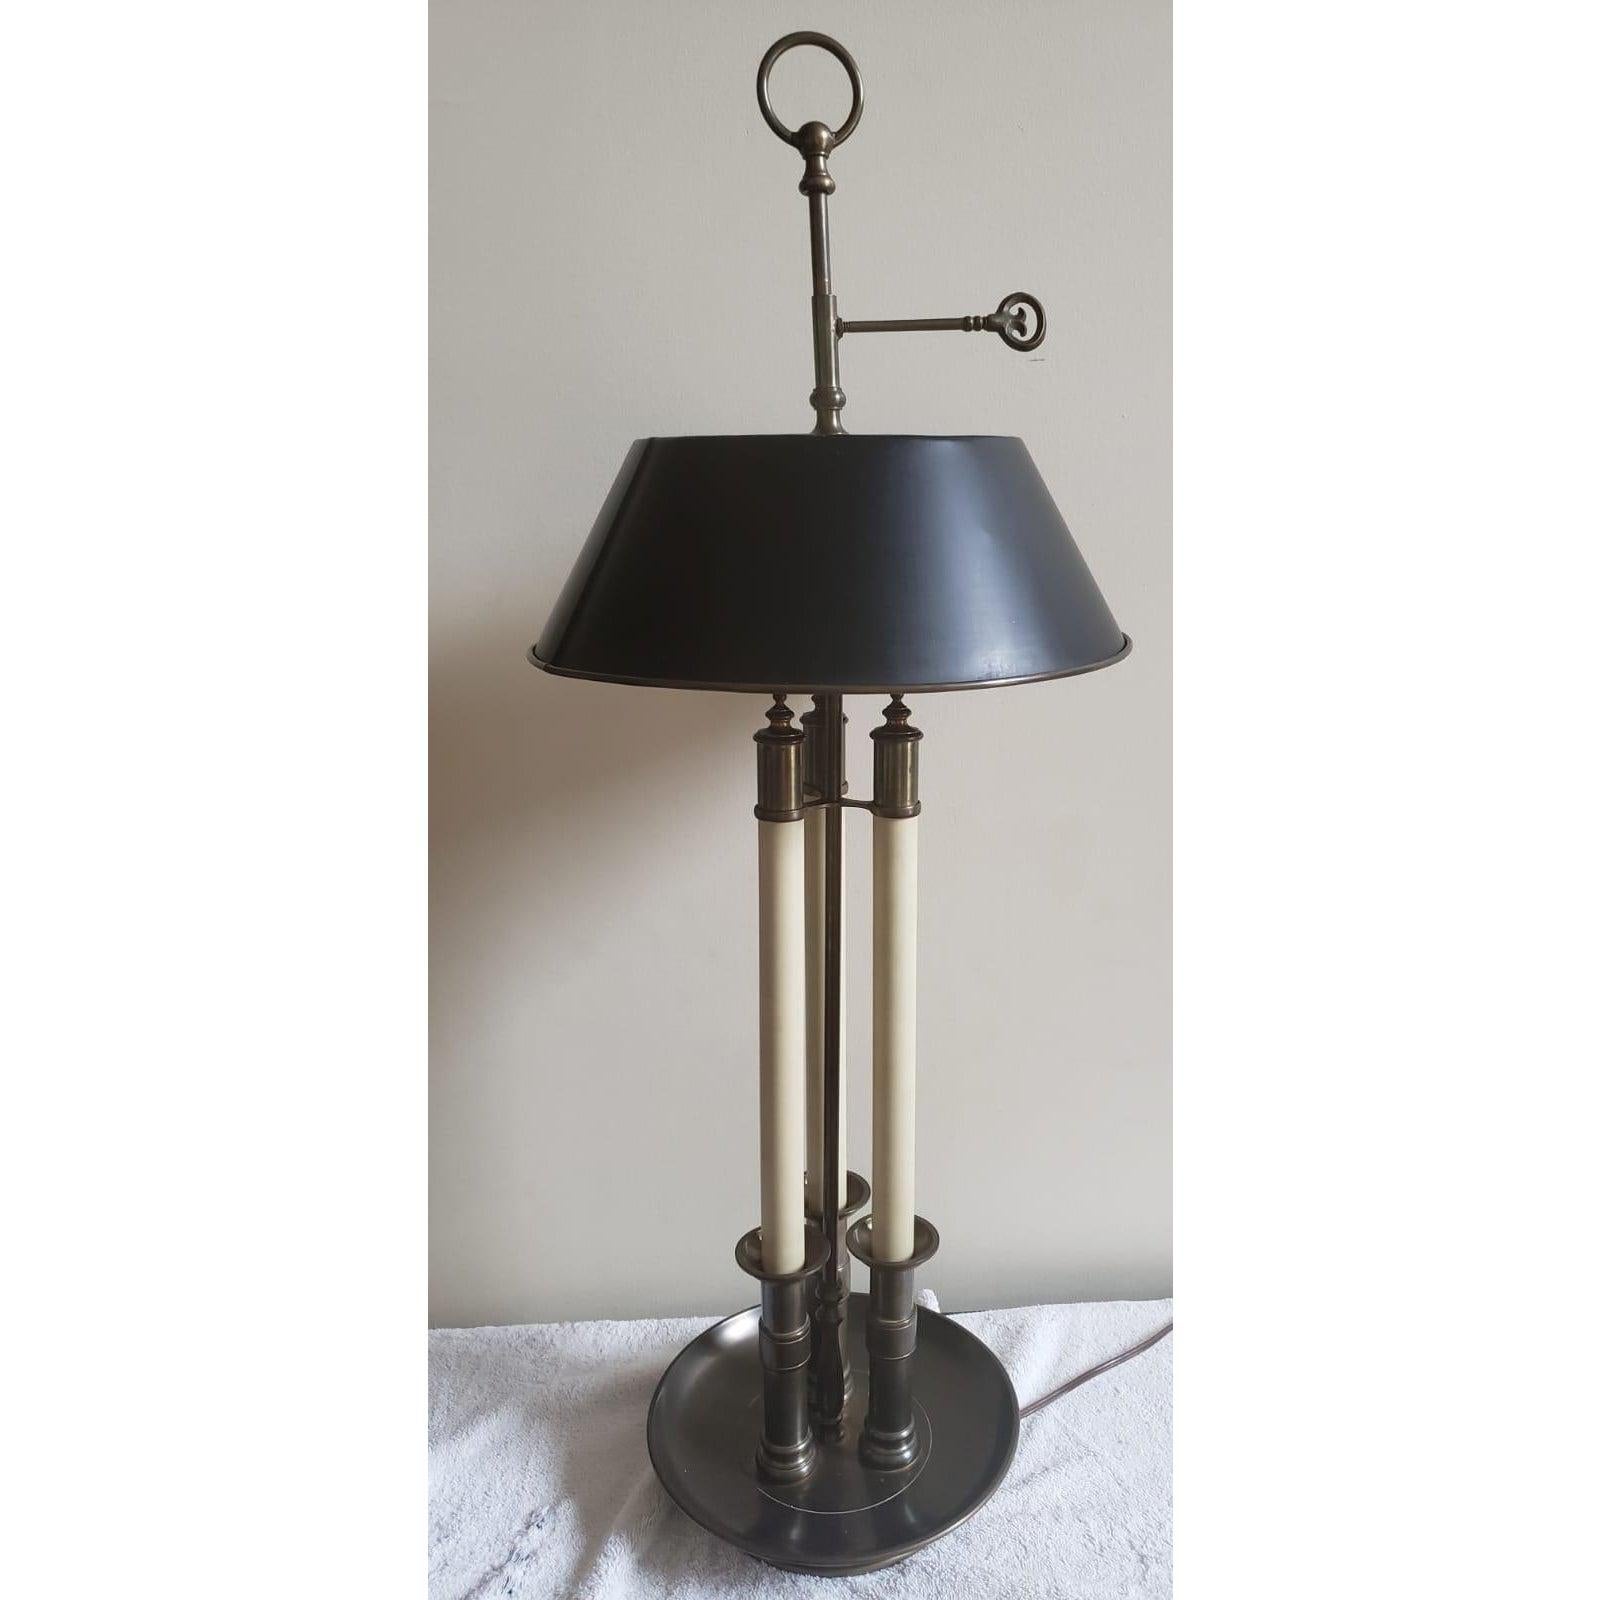 1972 Chapman patinated Metal Bouillotte Lamp with Tole Shade 3